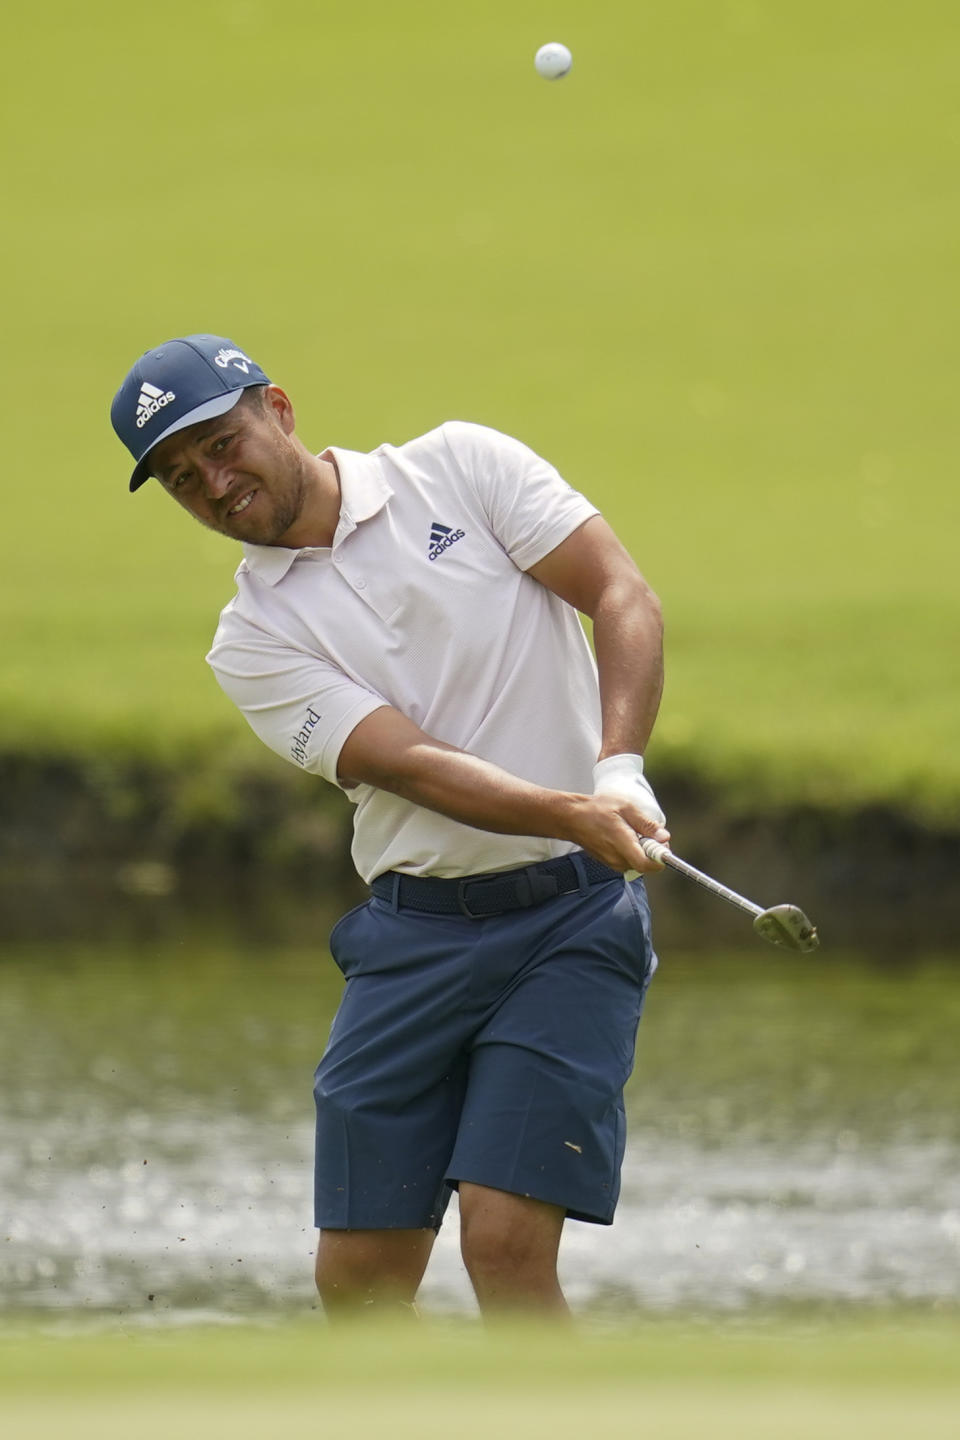 Xander Schauffele chips to the green on the 13th hole during a practice round for the PGA Championship golf tournament, Tuesday, May 17, 2022, in Tulsa, Okla. (AP Photo/Sue Ogrocki)